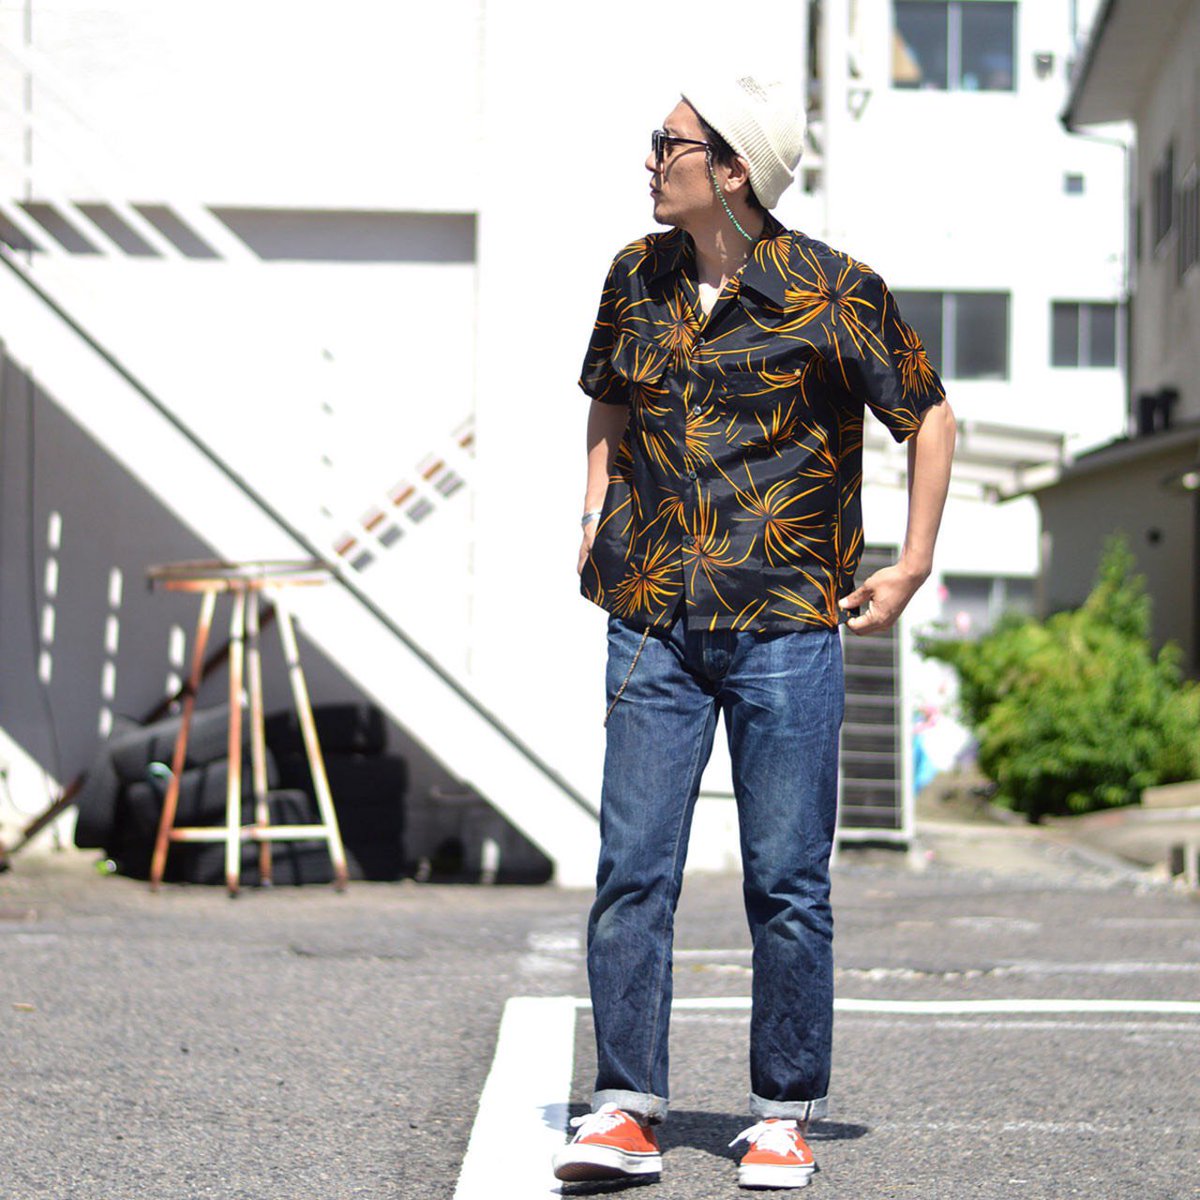 Synthemesc シンセメスク 6 June 17 Outfit Anachronorm Rayon Hand Print S S Shirt Hanabi Hand Print Anachronorm アナクロノーム